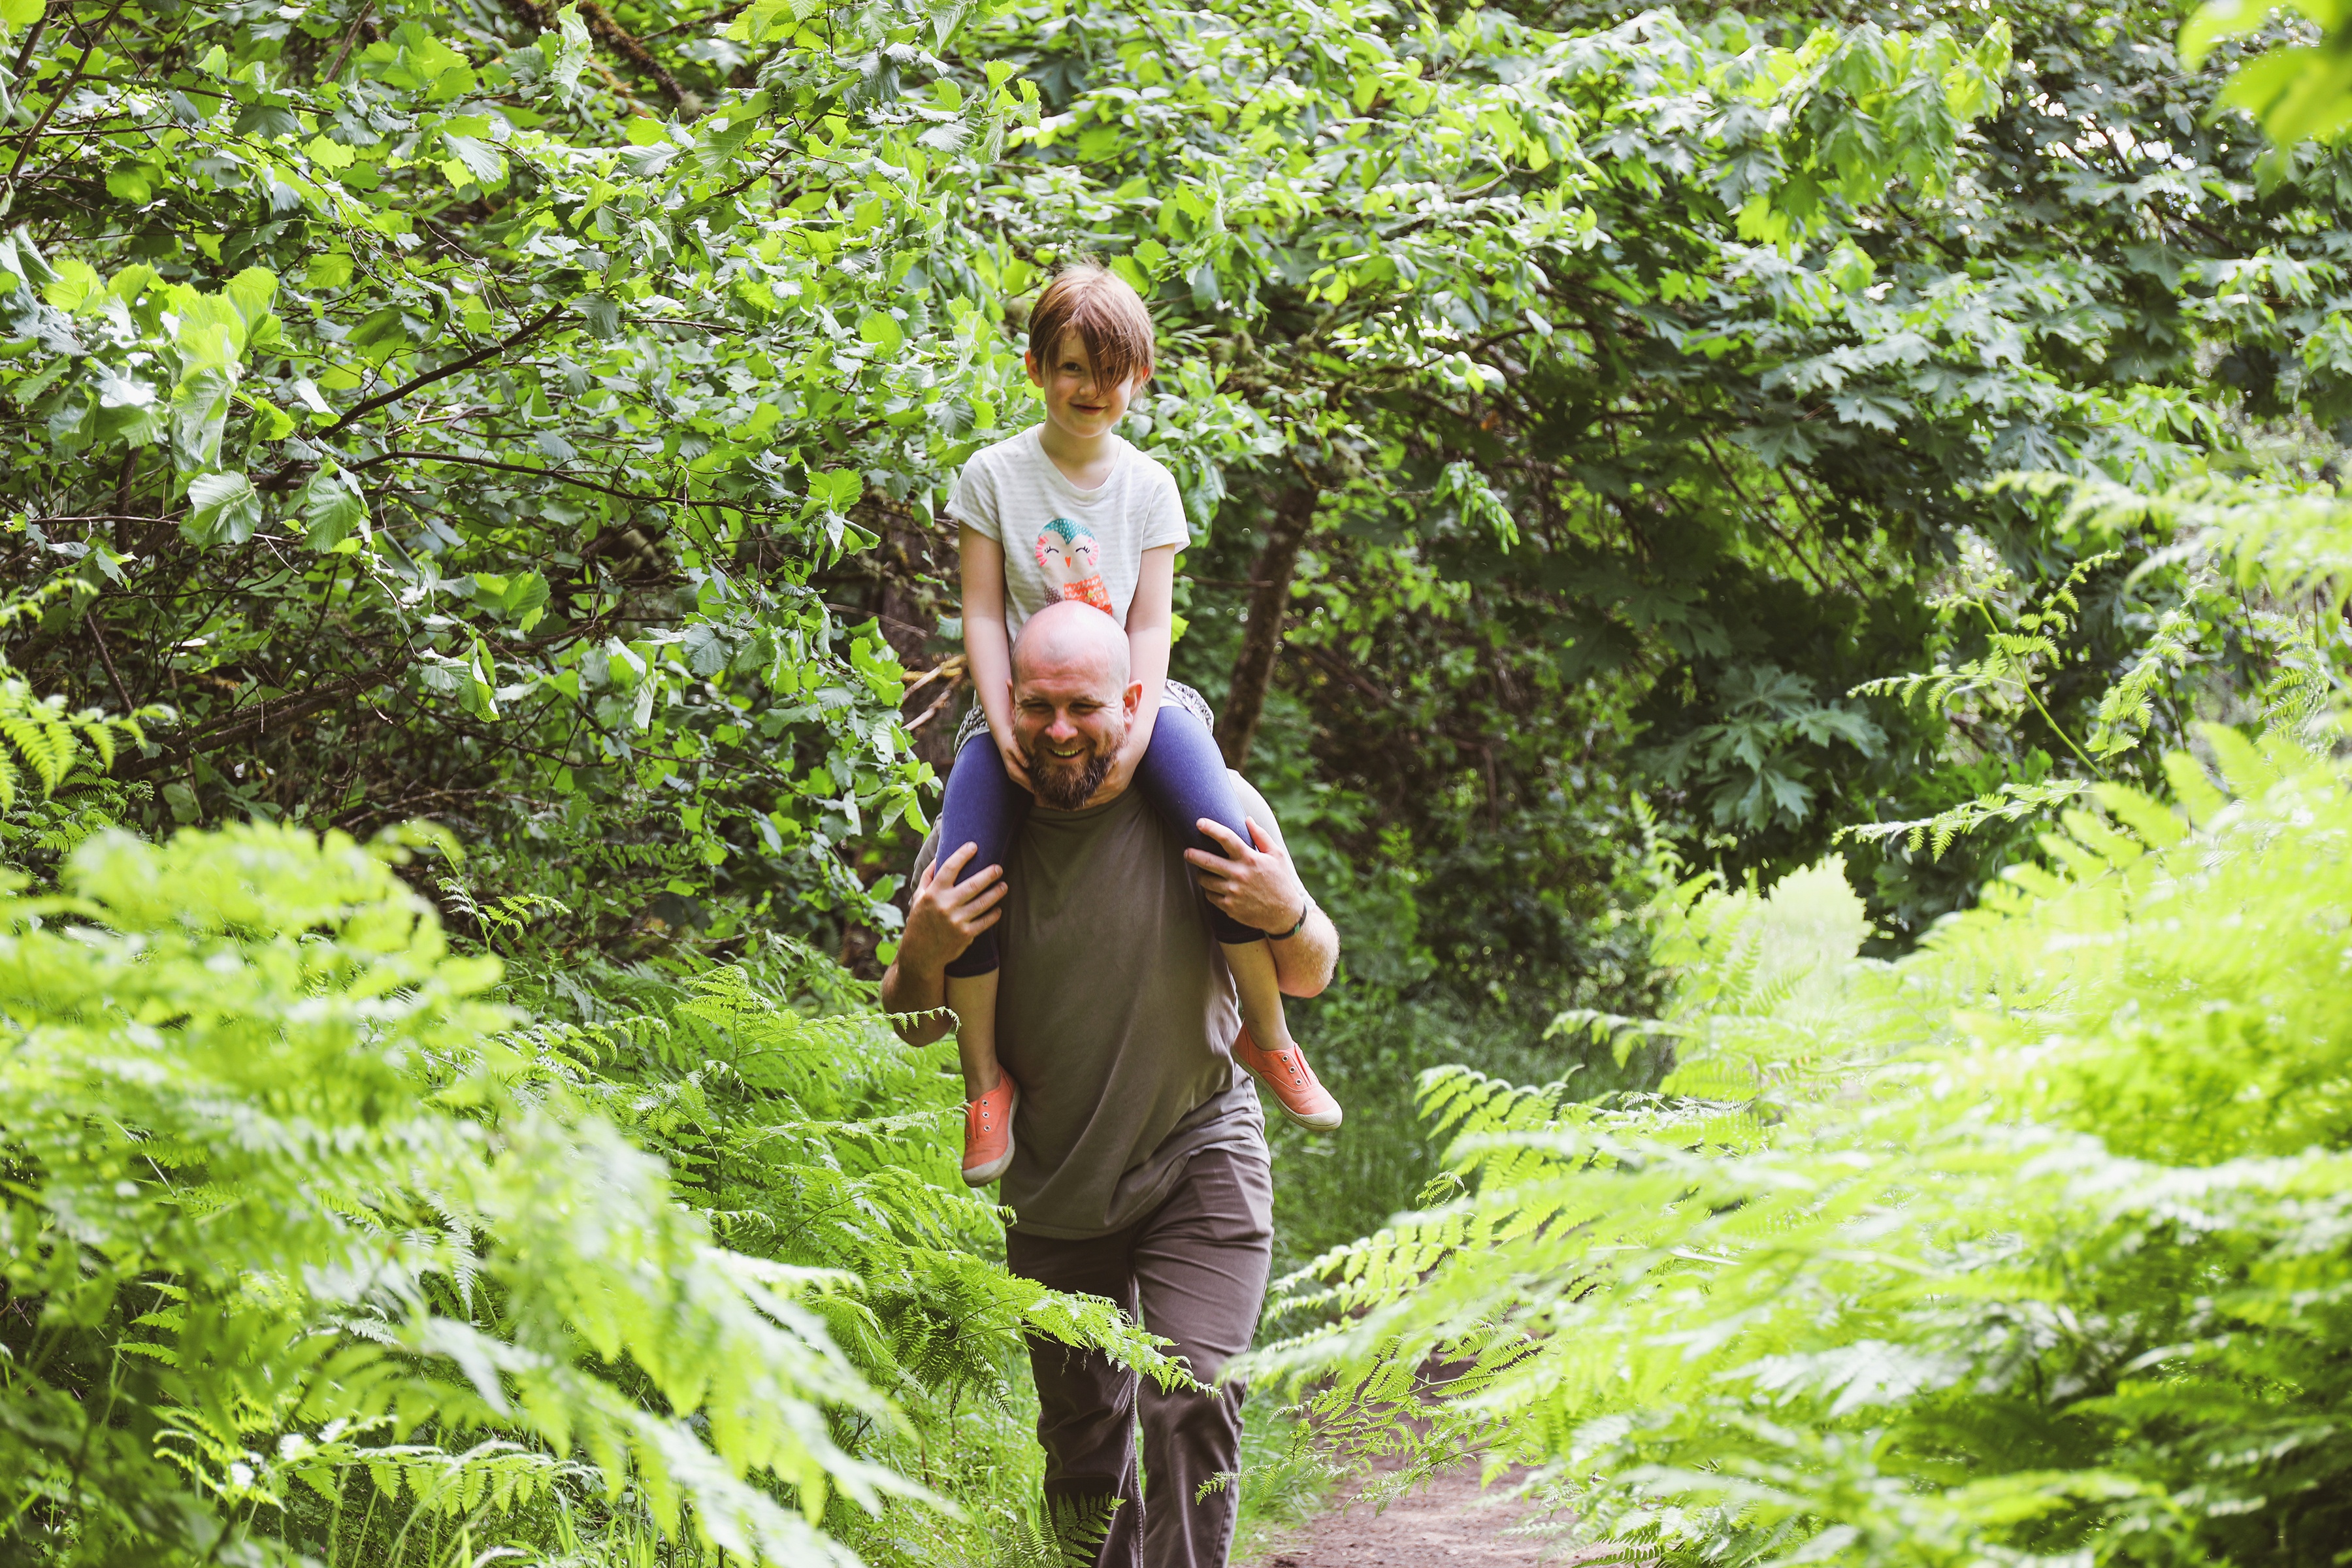 Girl sitting on father's shoulders walking through forest trails, hiking